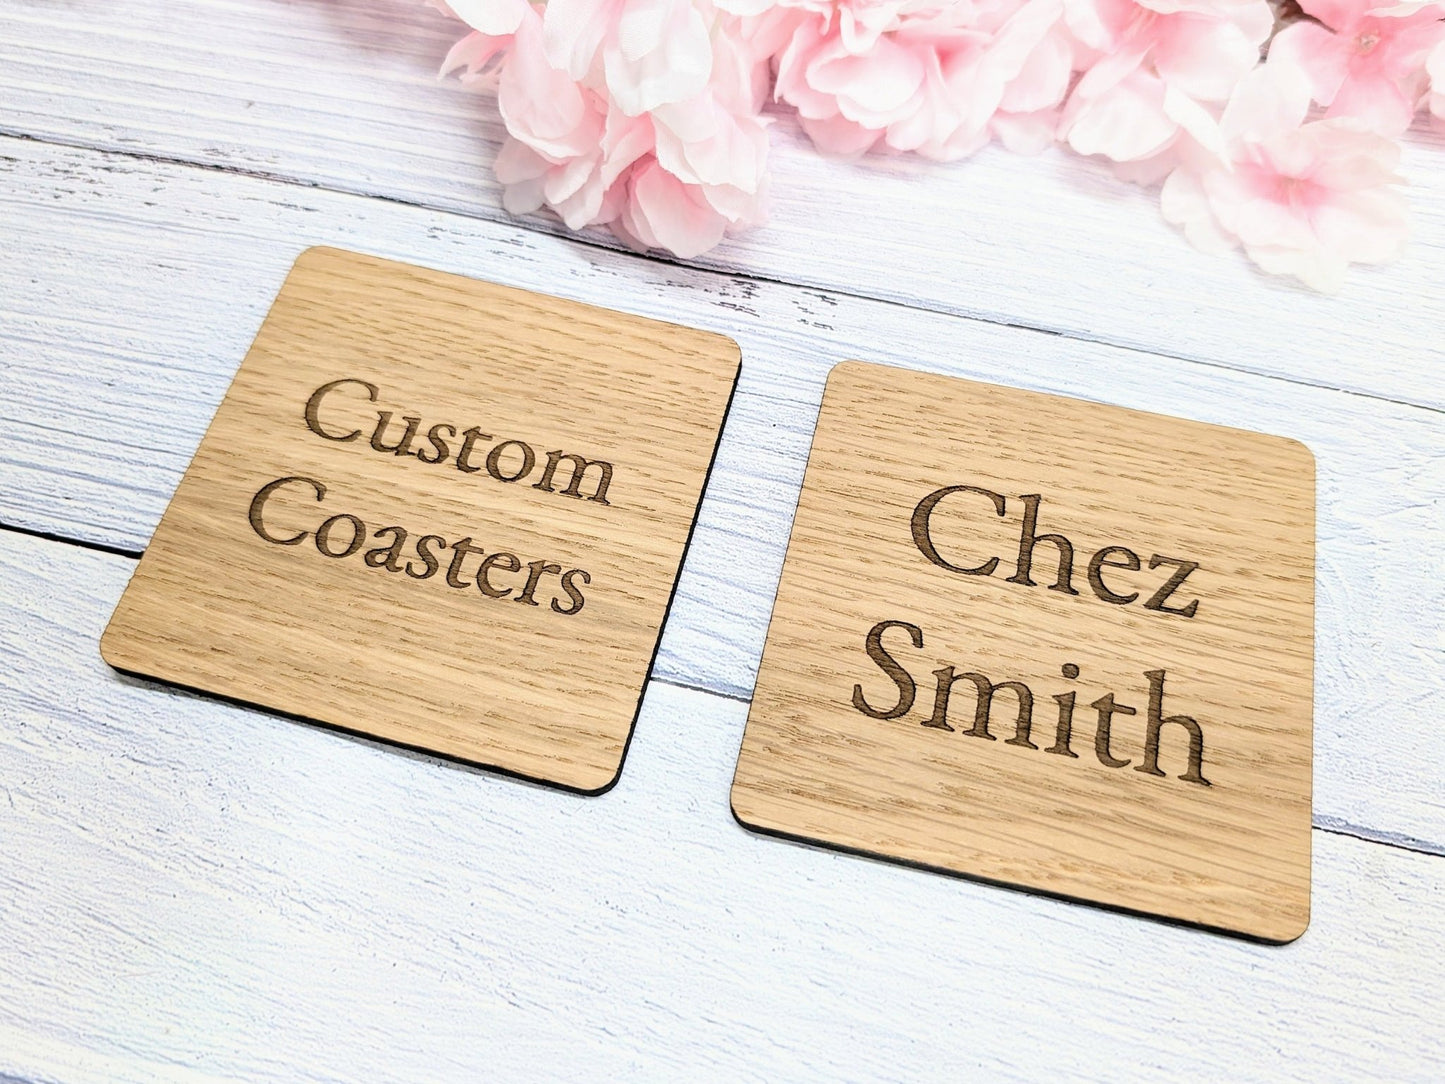 Custom Oak Veneer Square Coasters - Eco-Friendly Personalised Drink Coasters for Home Decor & Gifting, 90mm x90mm - CherryGroveCraft